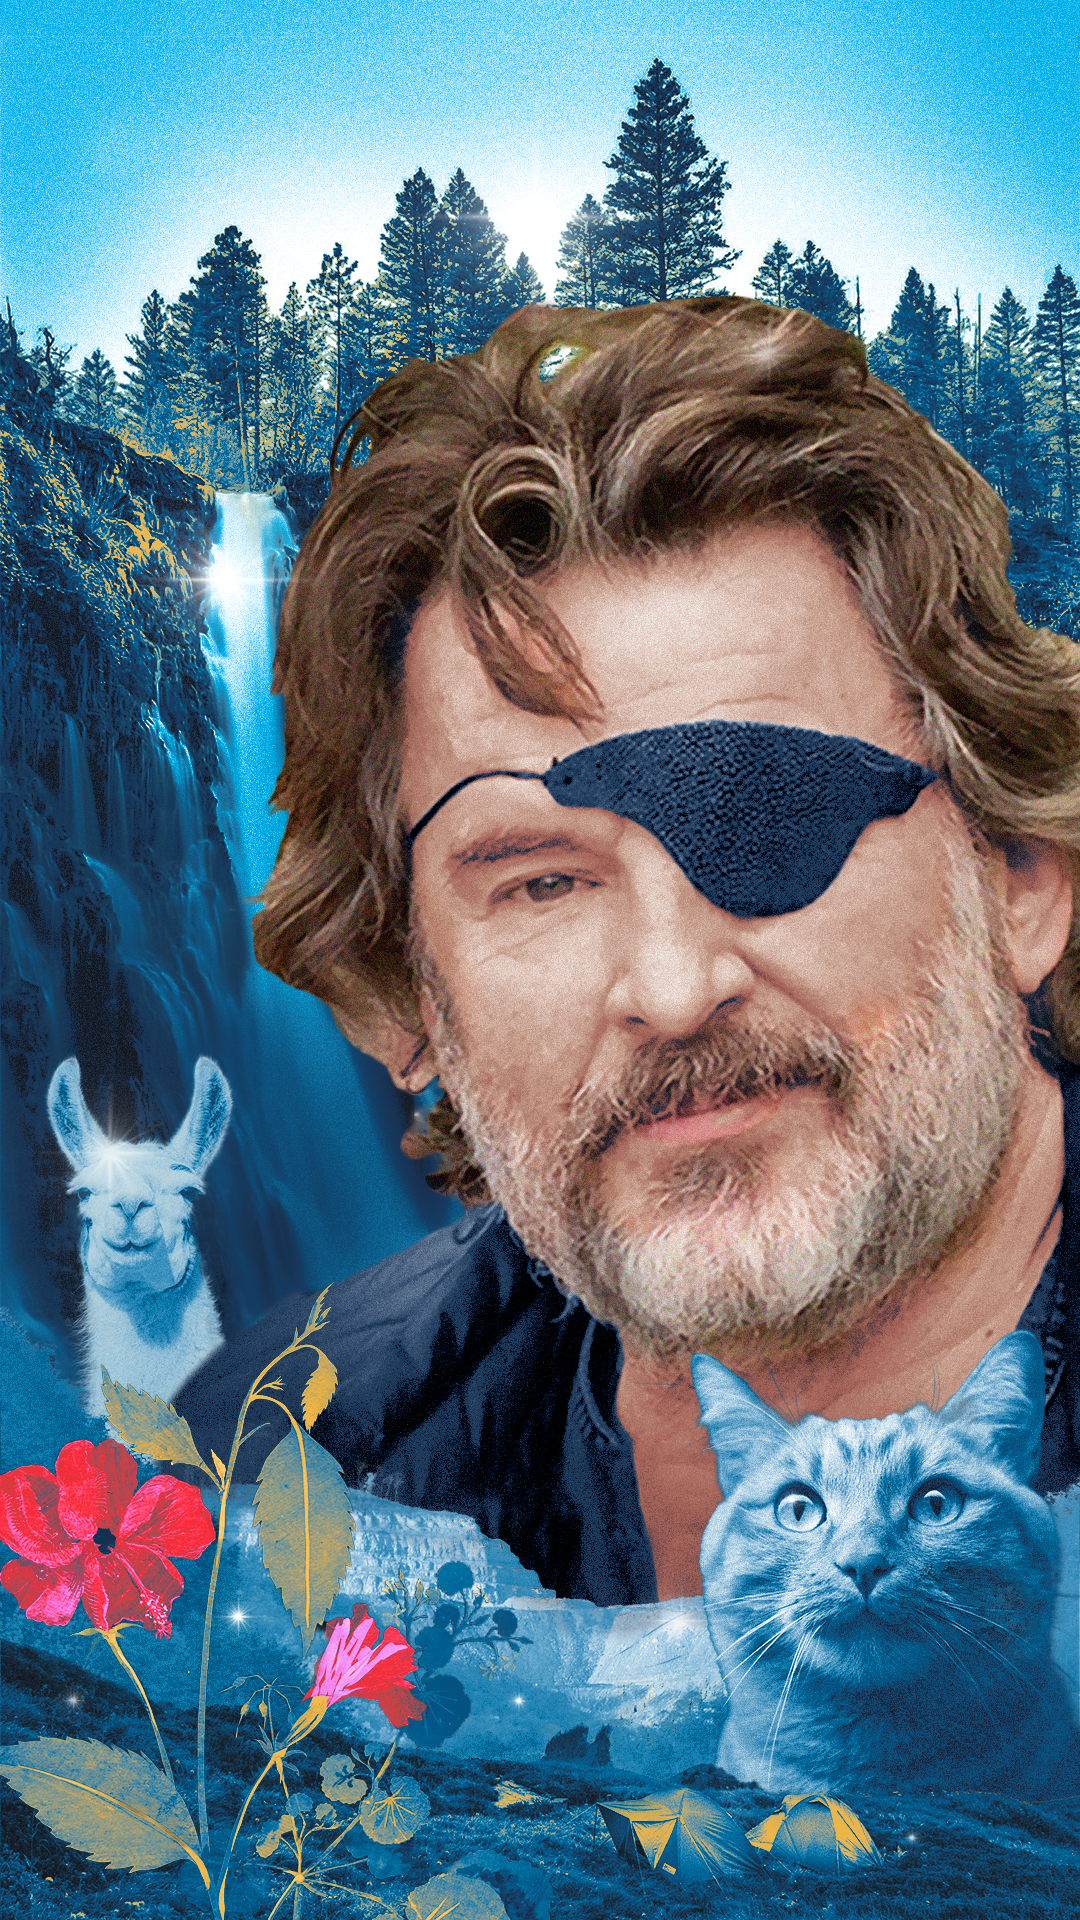 A portrait of Peter Illyn, a middle-aged white man with a beard and eyepatch. In the background is a waterfall, in the foreground is a cat and llama.